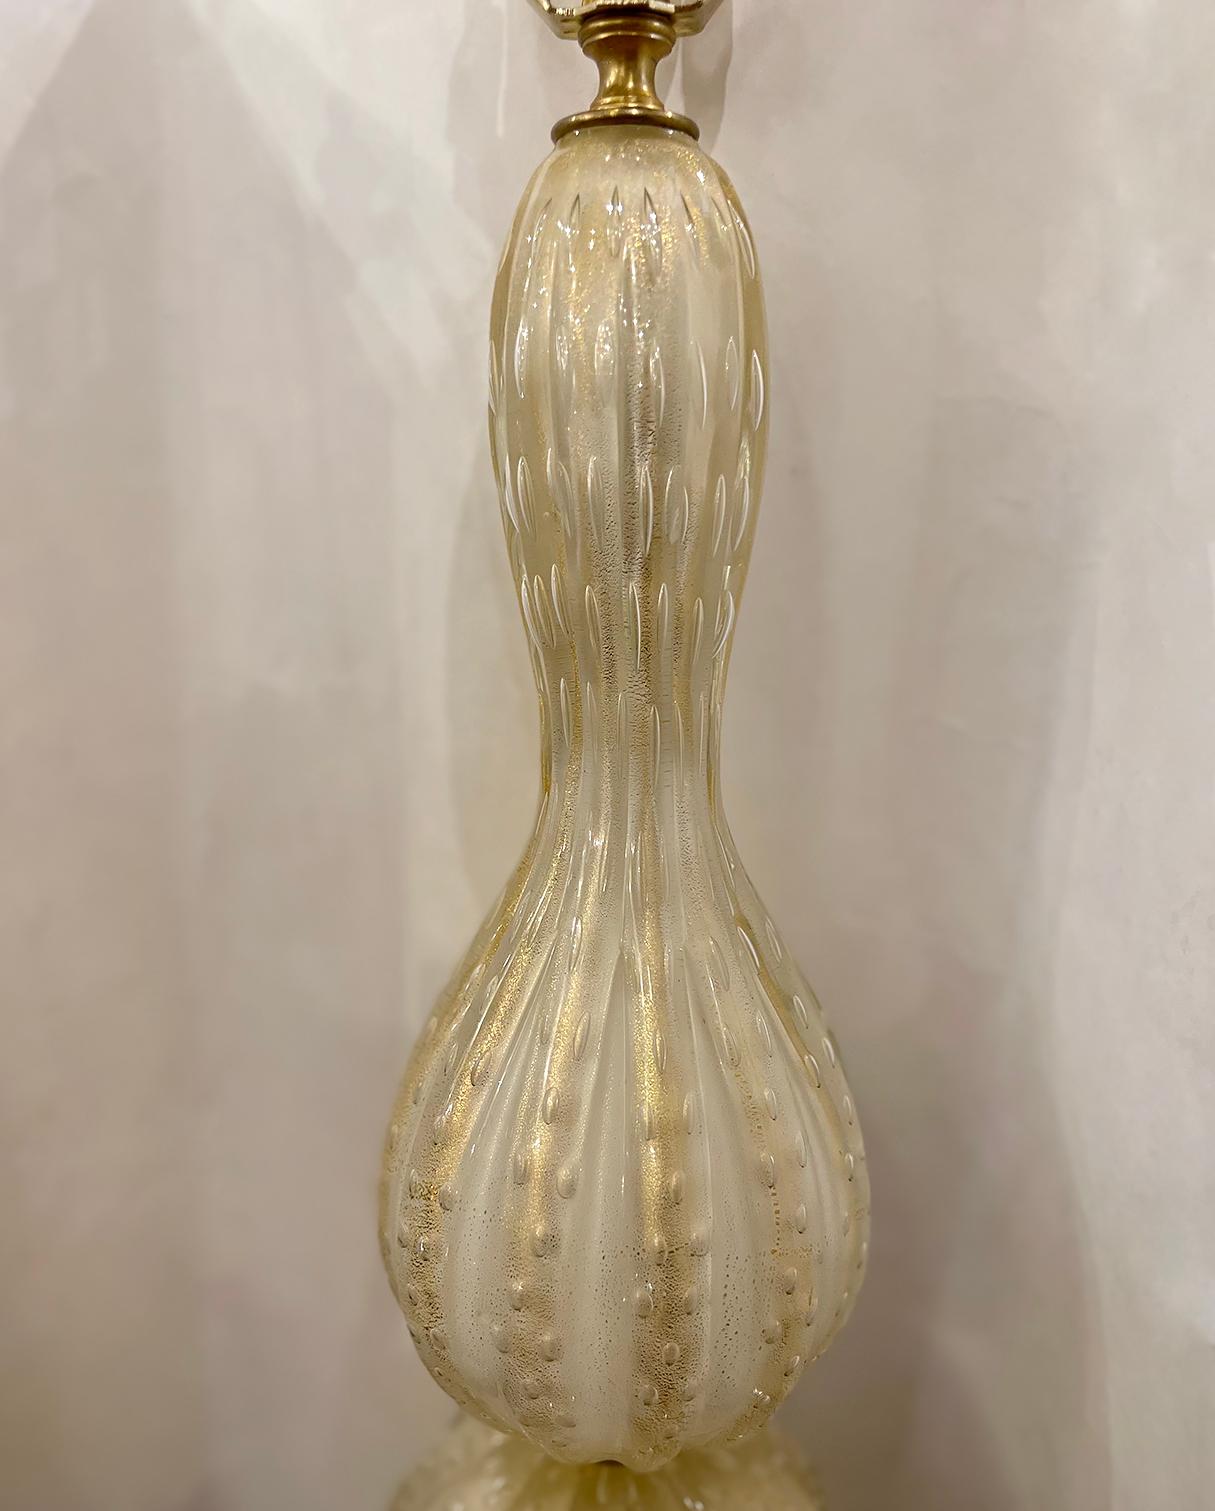 A single circa 1930s Italian blown Murano glass lamp with gold speckles in a white and clear body. 

Measurements:
Heigh of body: 21